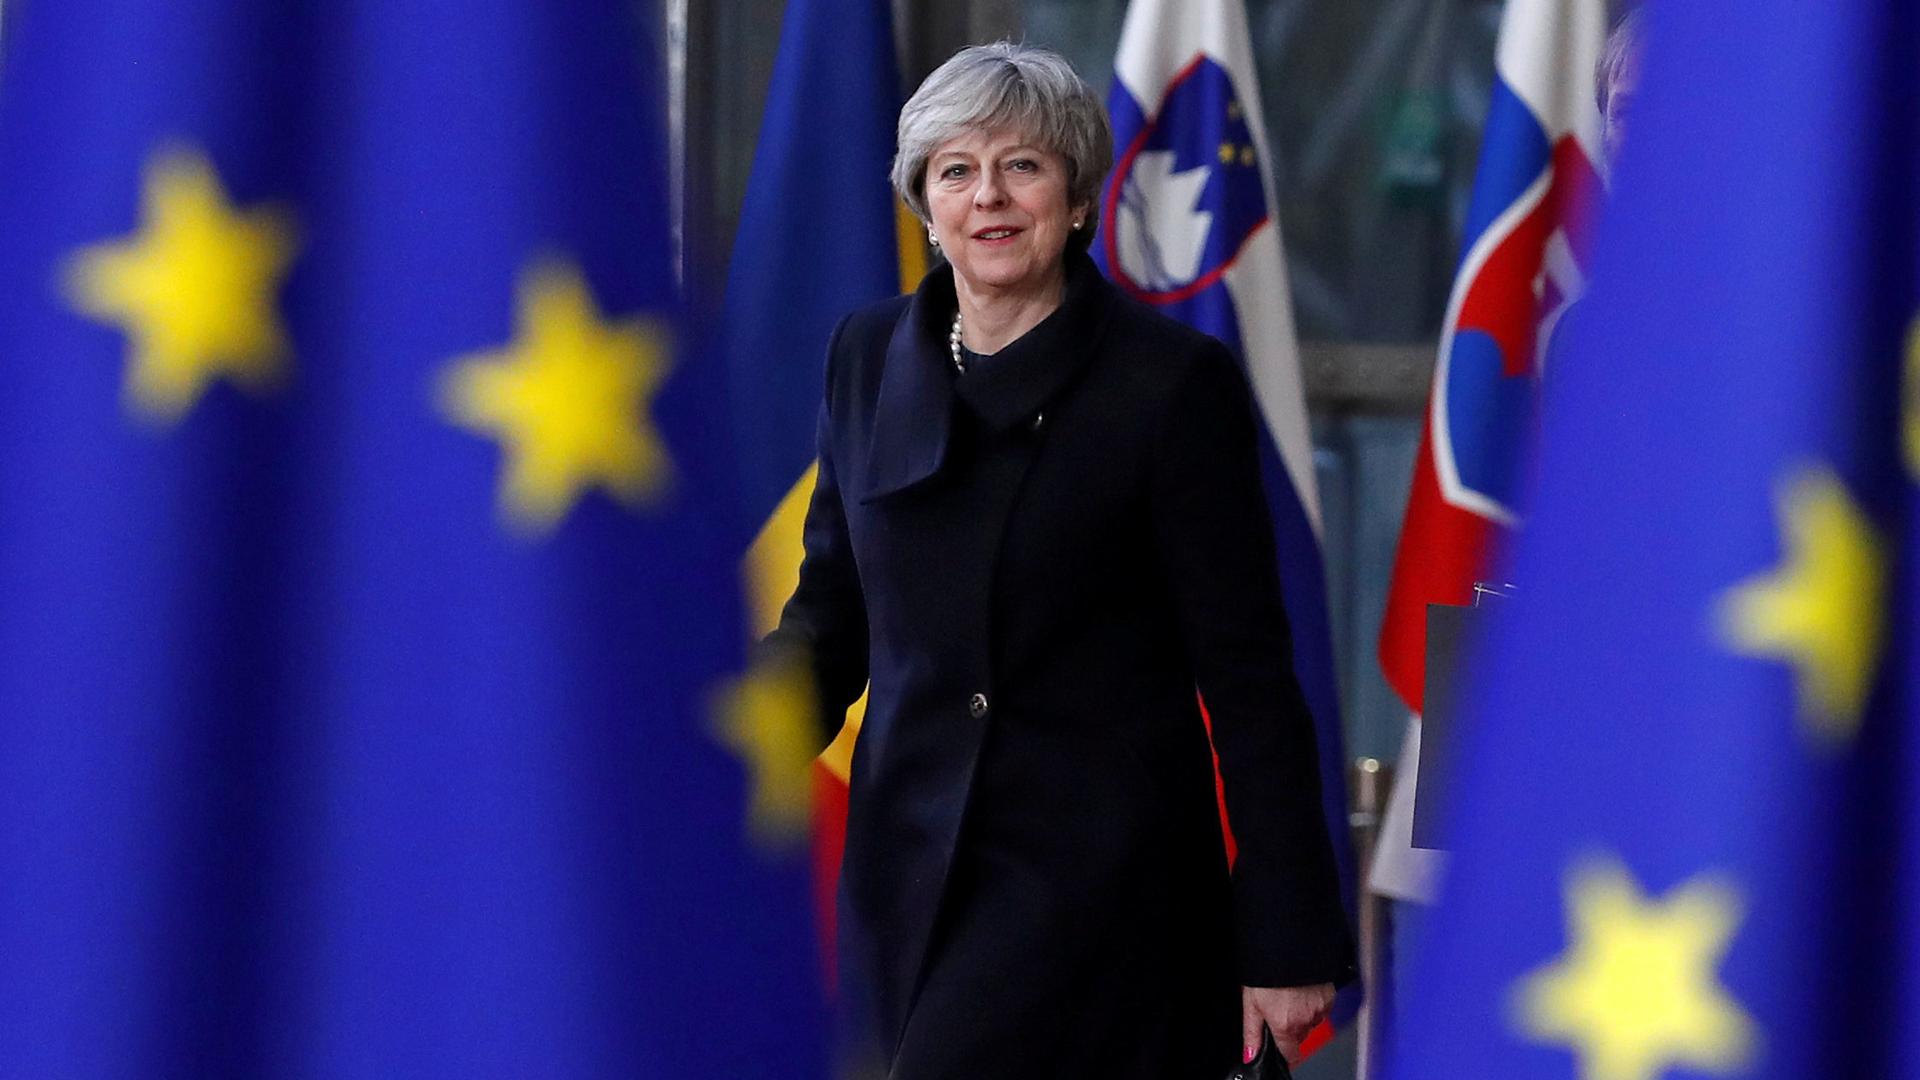 Britain's Prime Minister Theresa May wearing a dark blue jacket is picture between two EU flags in the foreground.